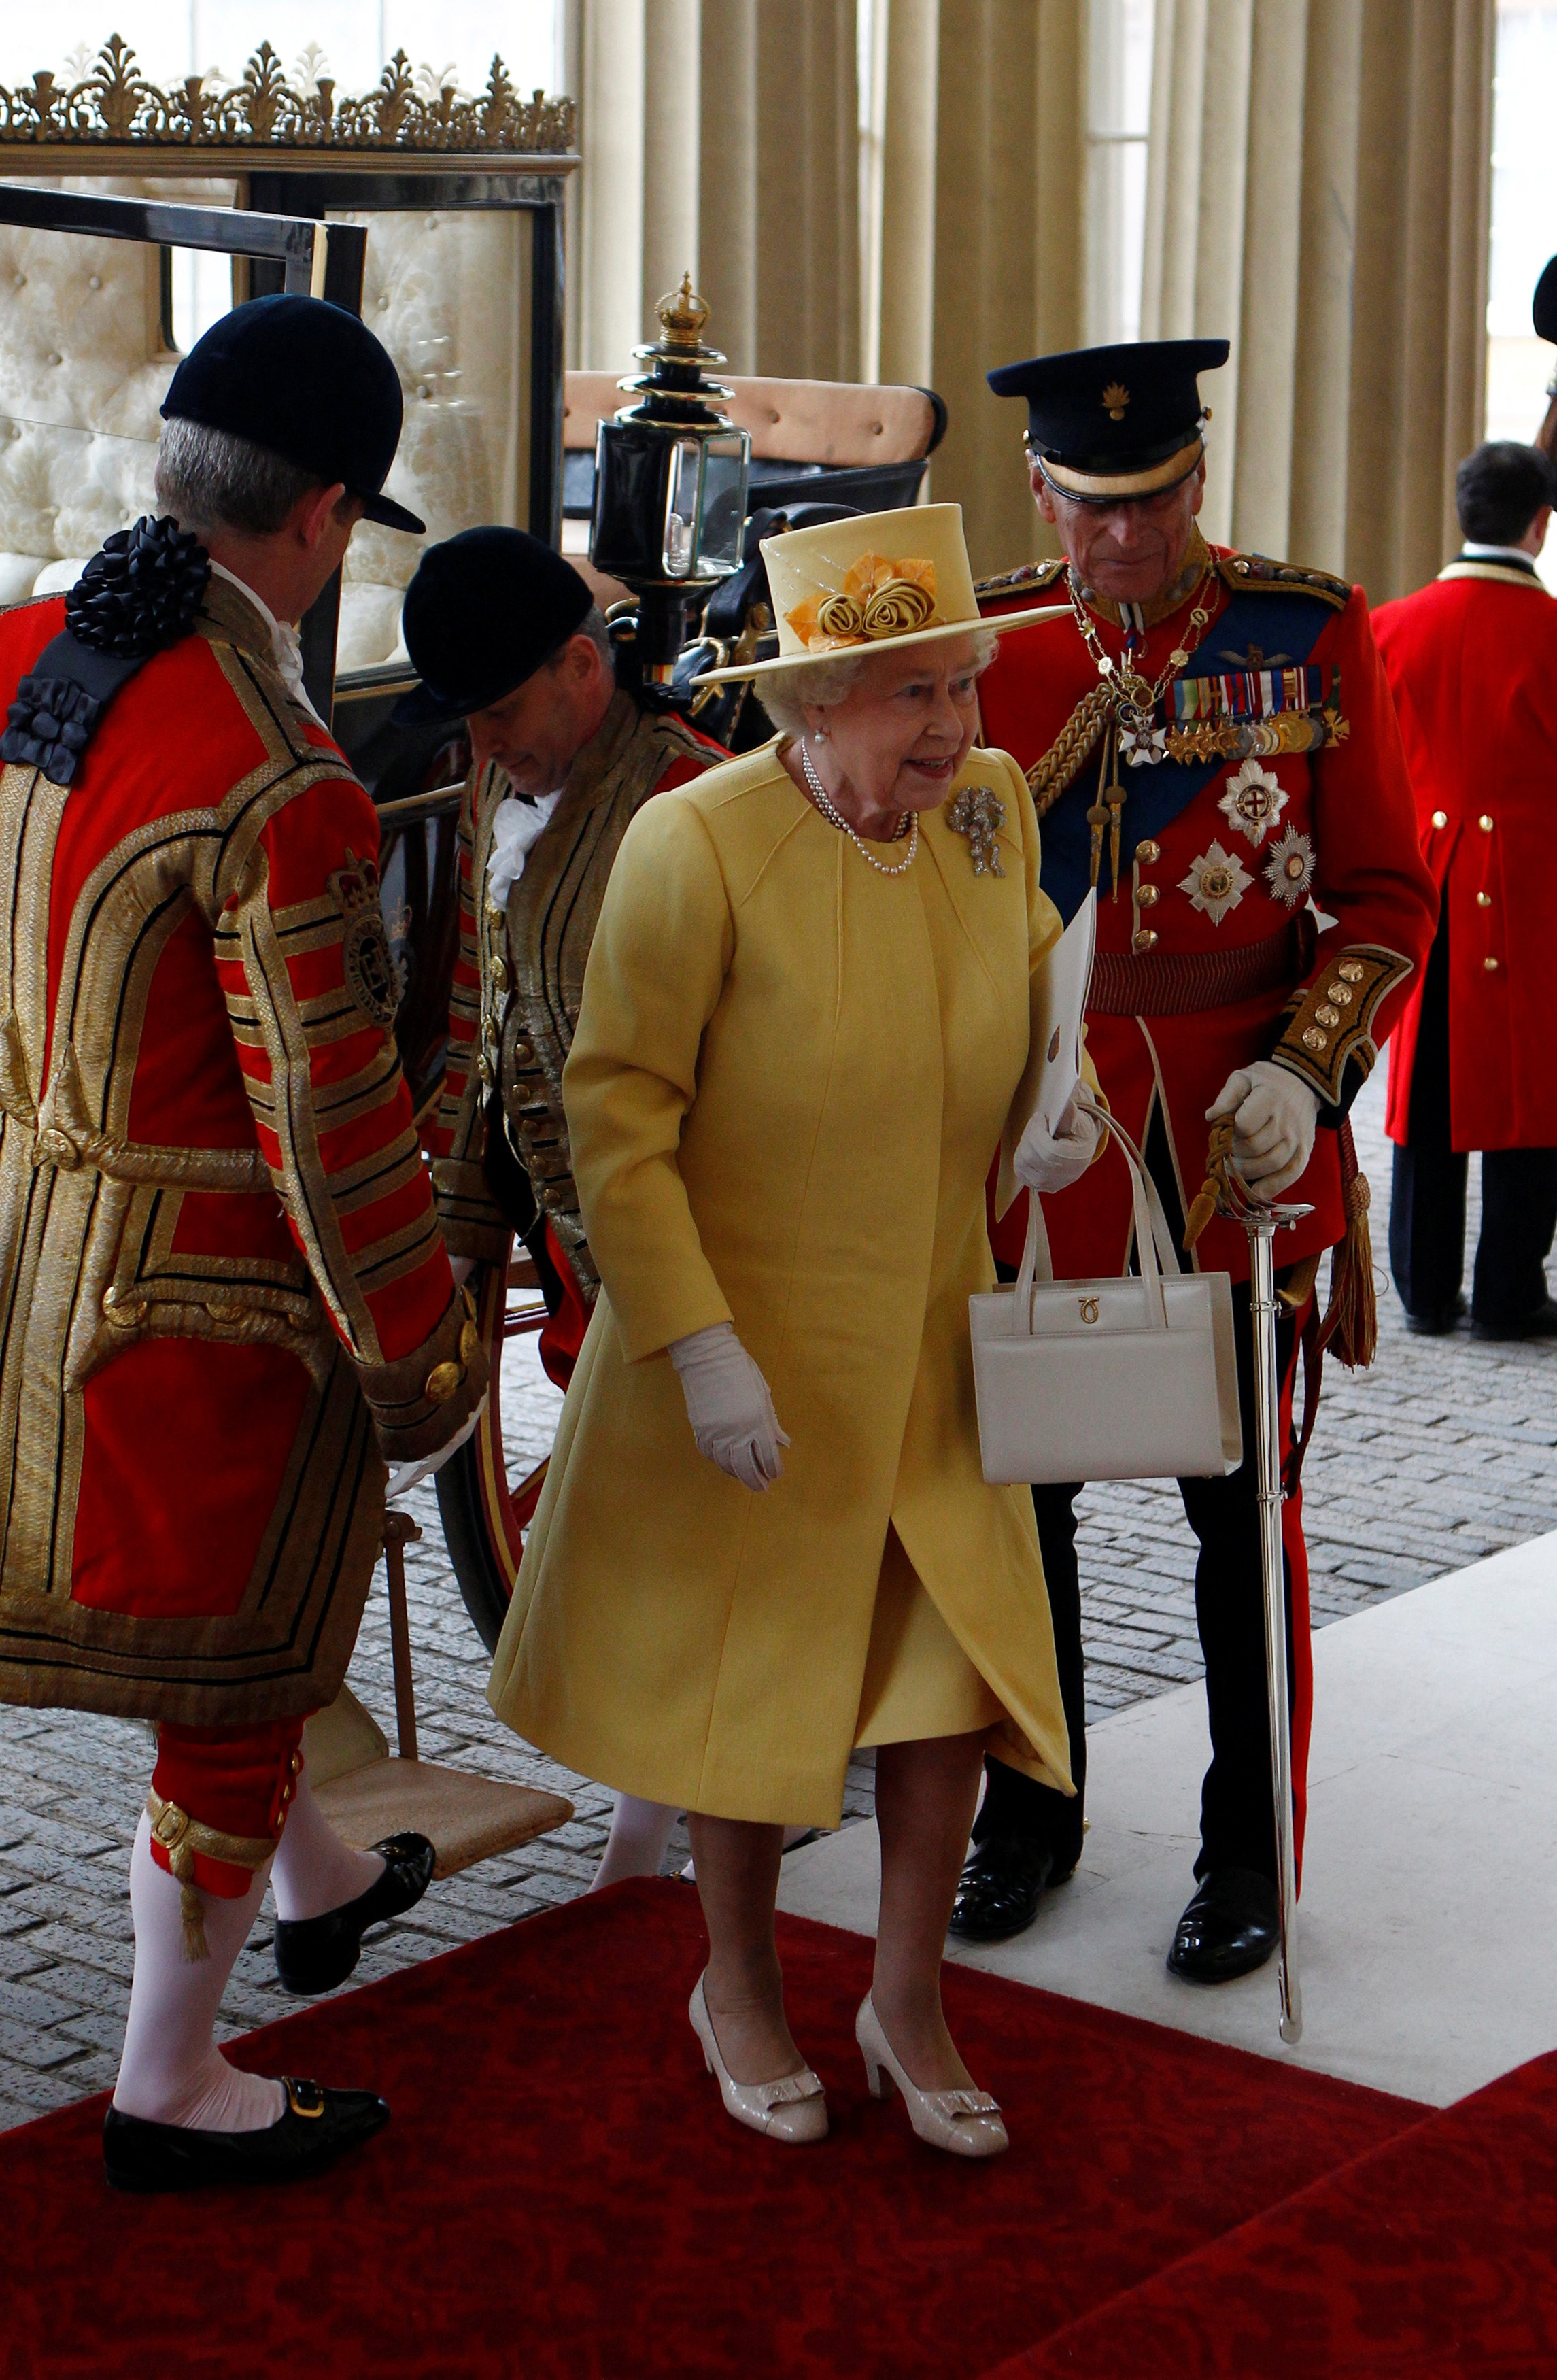 Britain's Queen Elizabeth arrives at Buckingham Palace after the wedding ceremony of Britain's Prince William and Catherine, Duchess of Cambridge, in central London